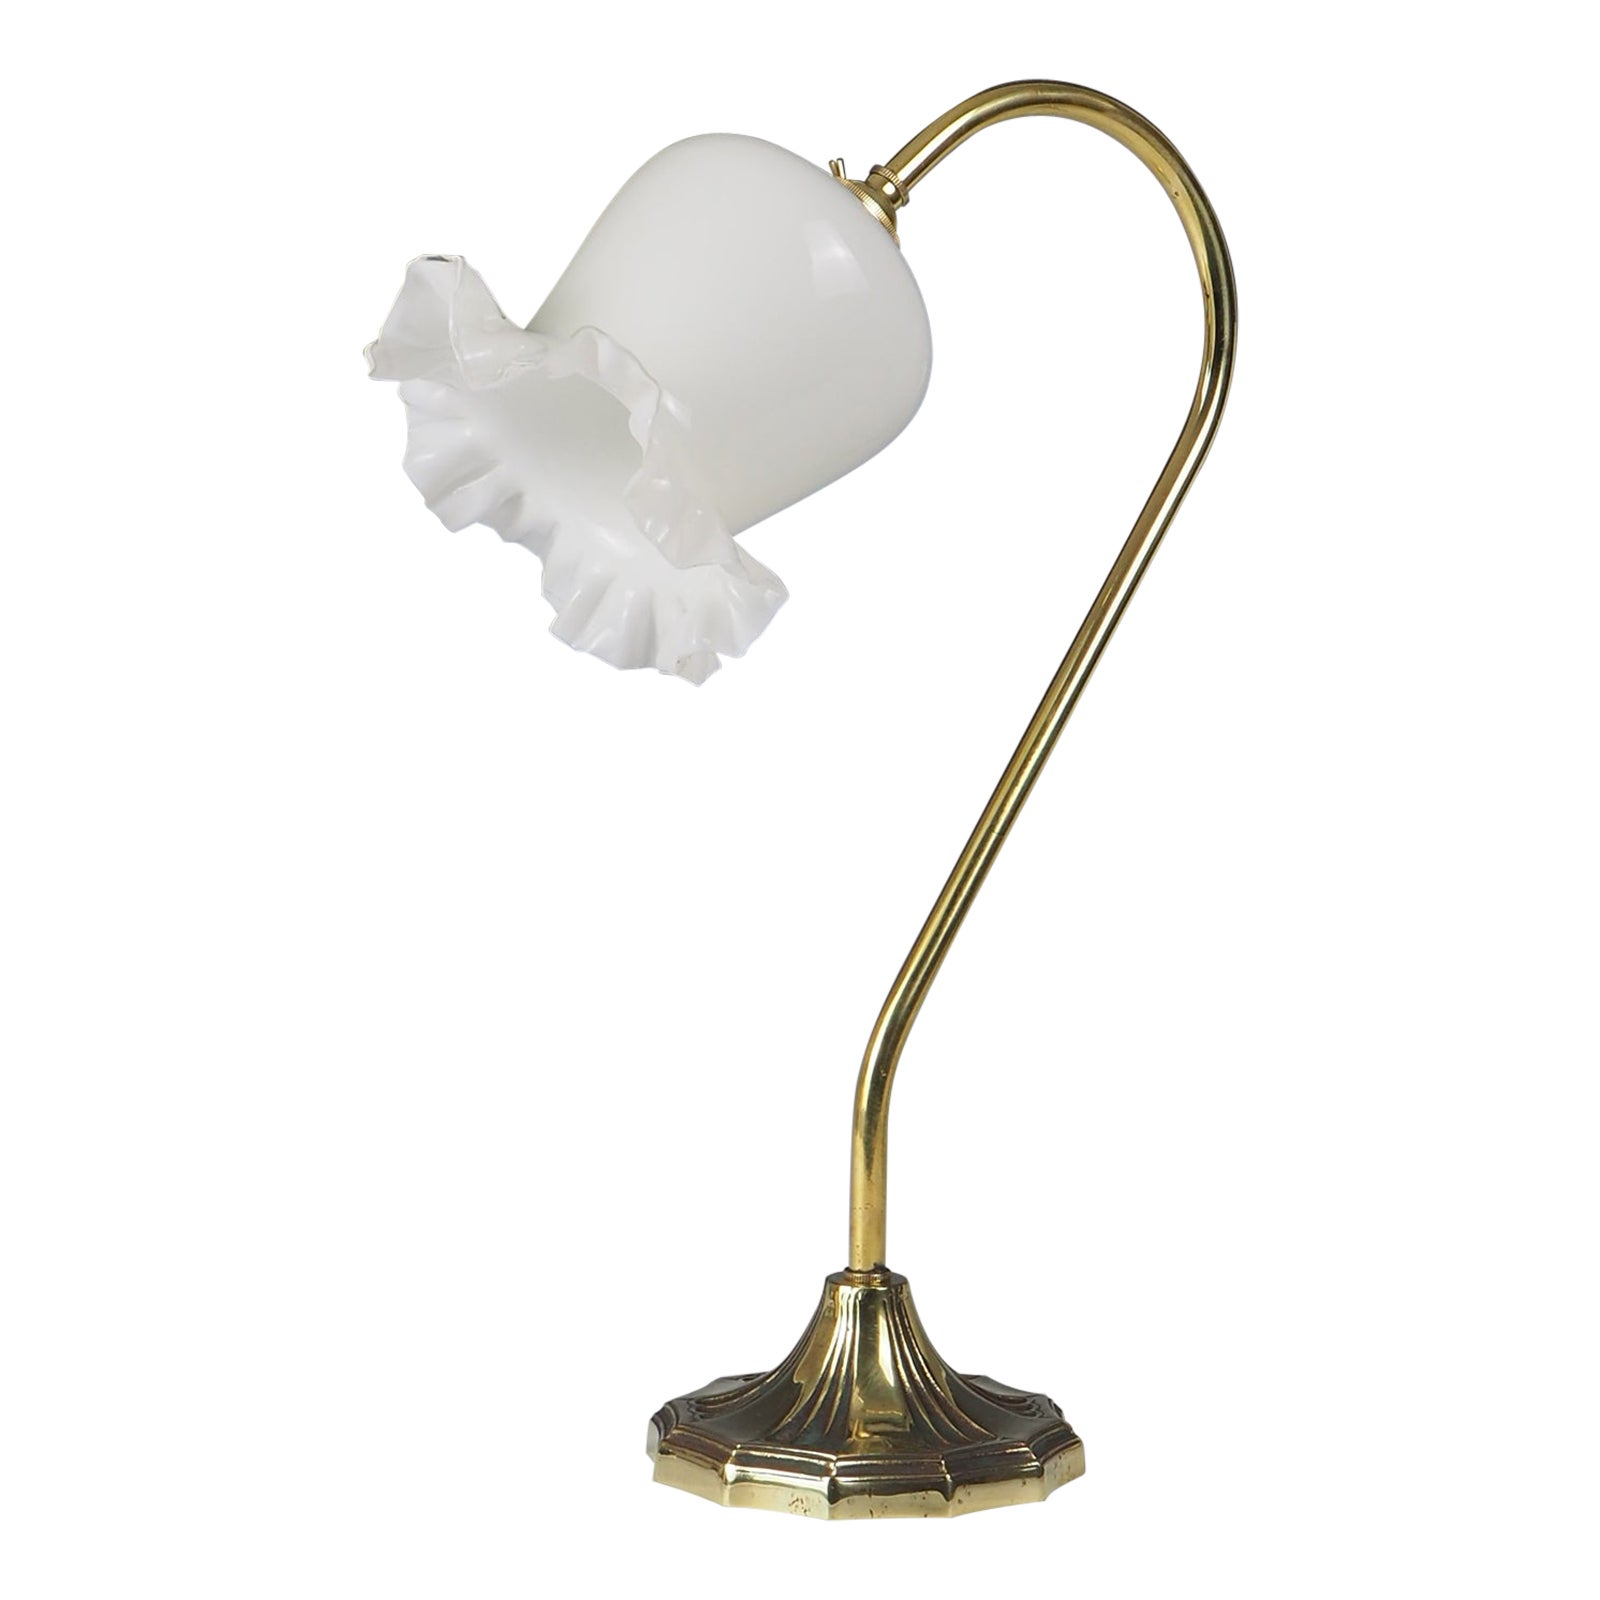 Elegant Art Nouveau Swan Neck Table Lamp with Shade